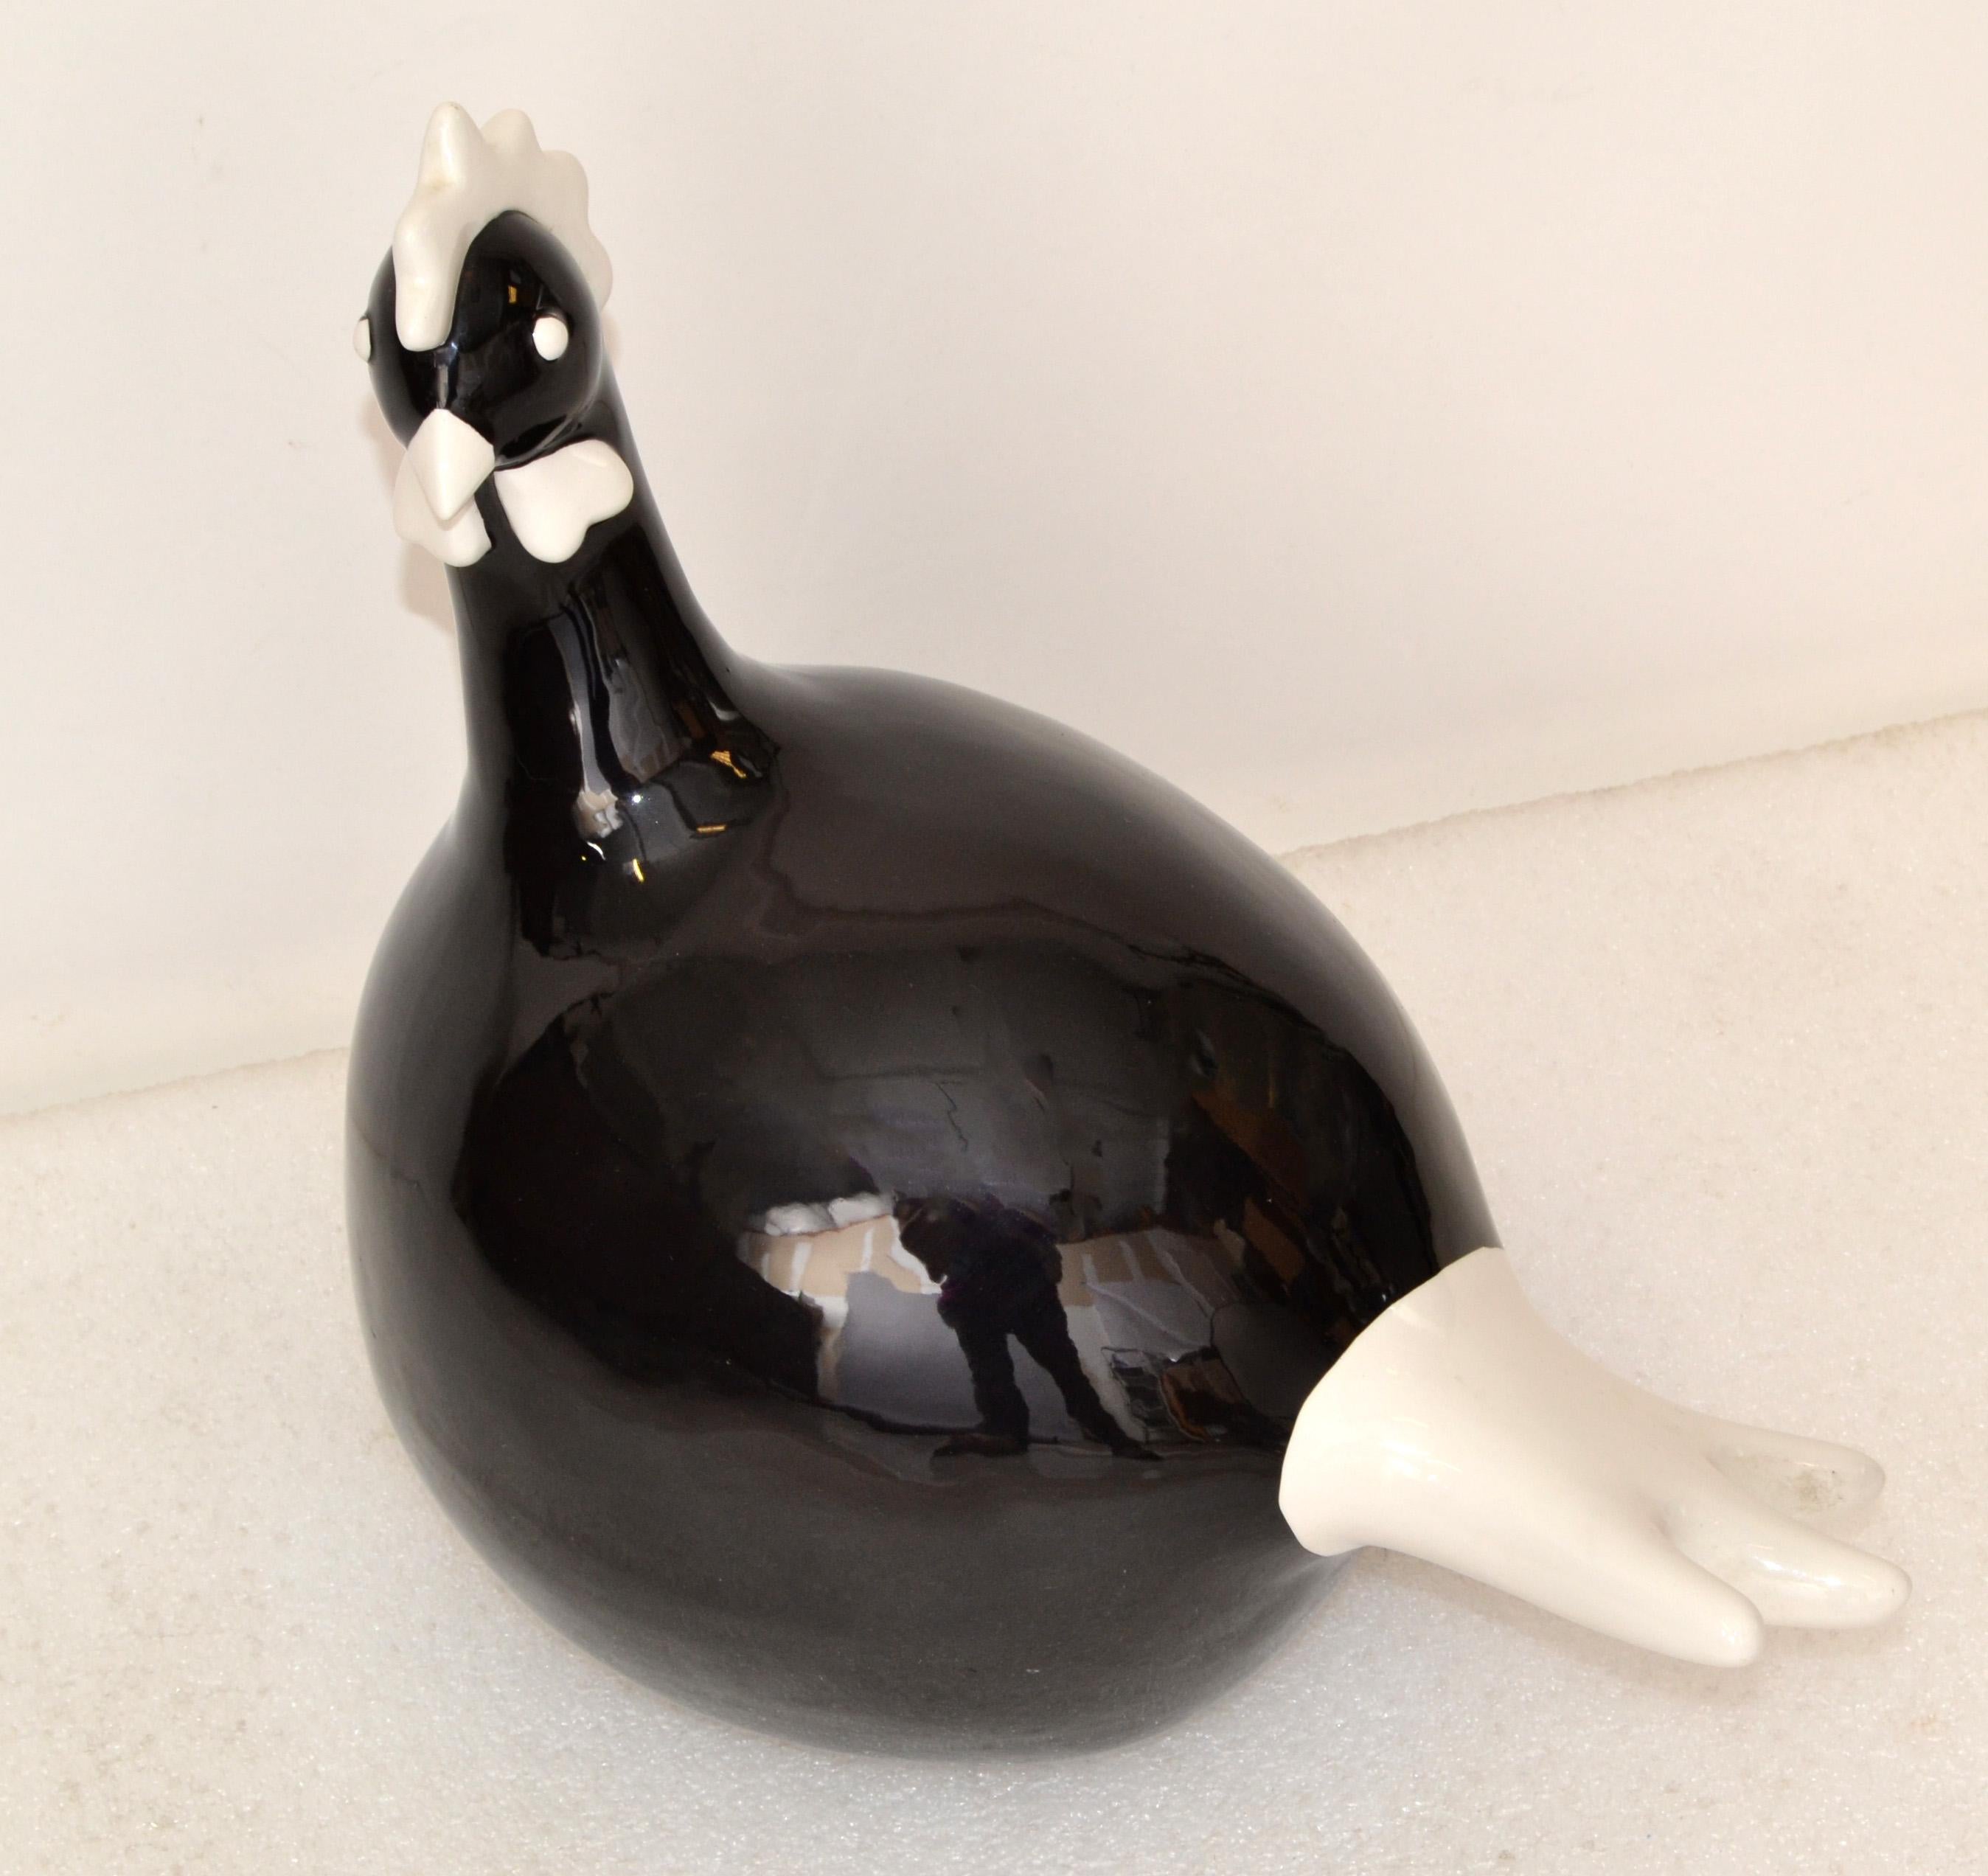 Black and White Hand-Crafted Ceramic Chicken Sculpture, Animal Figurine Folk Art In Good Condition For Sale In Miami, FL